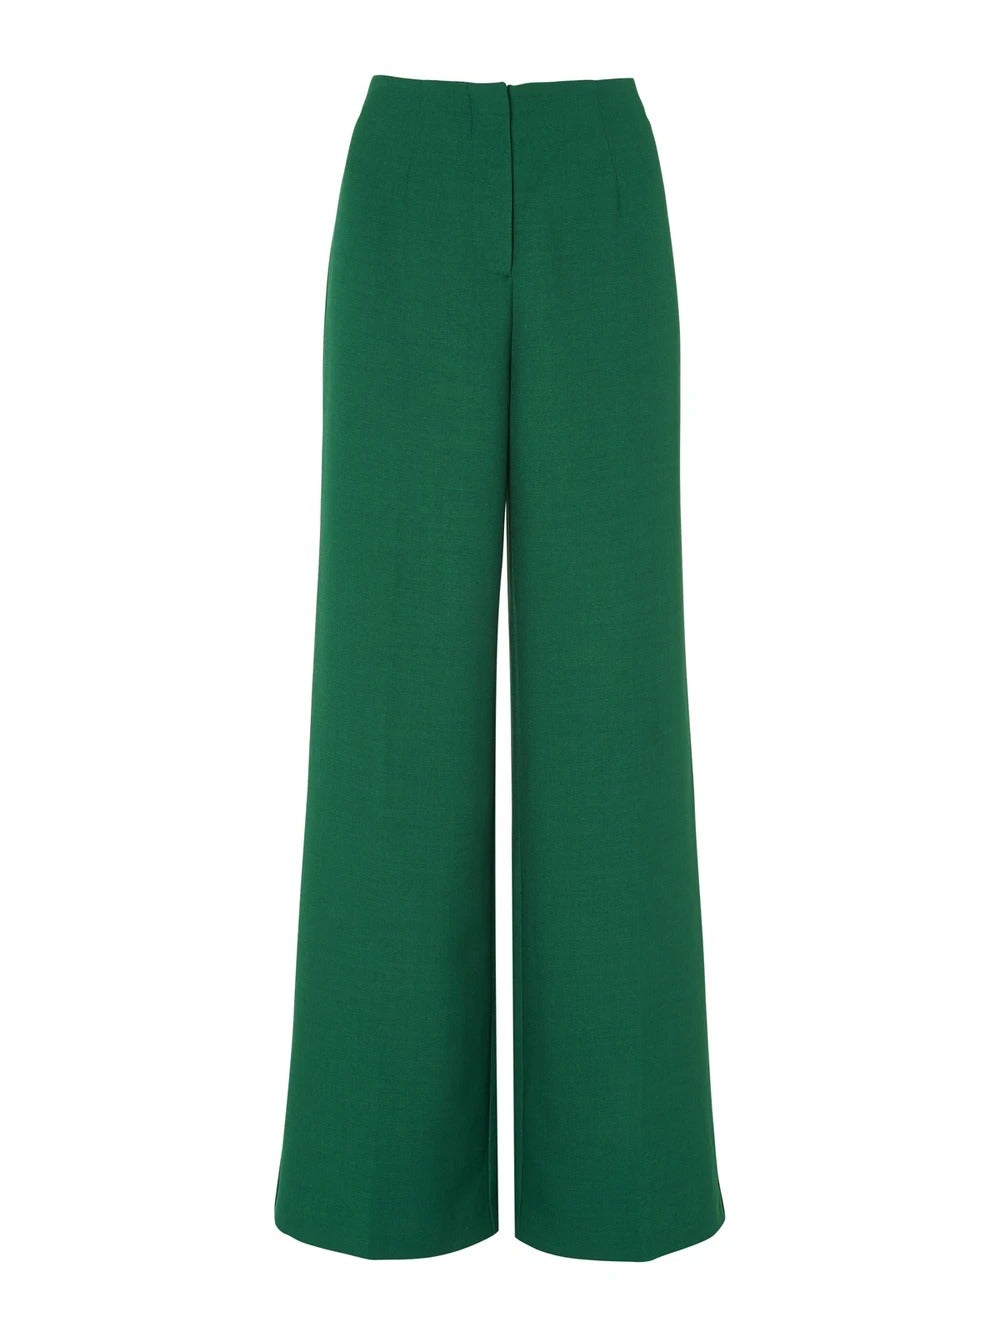 Kitri + Agnes Green Tailored Trousers